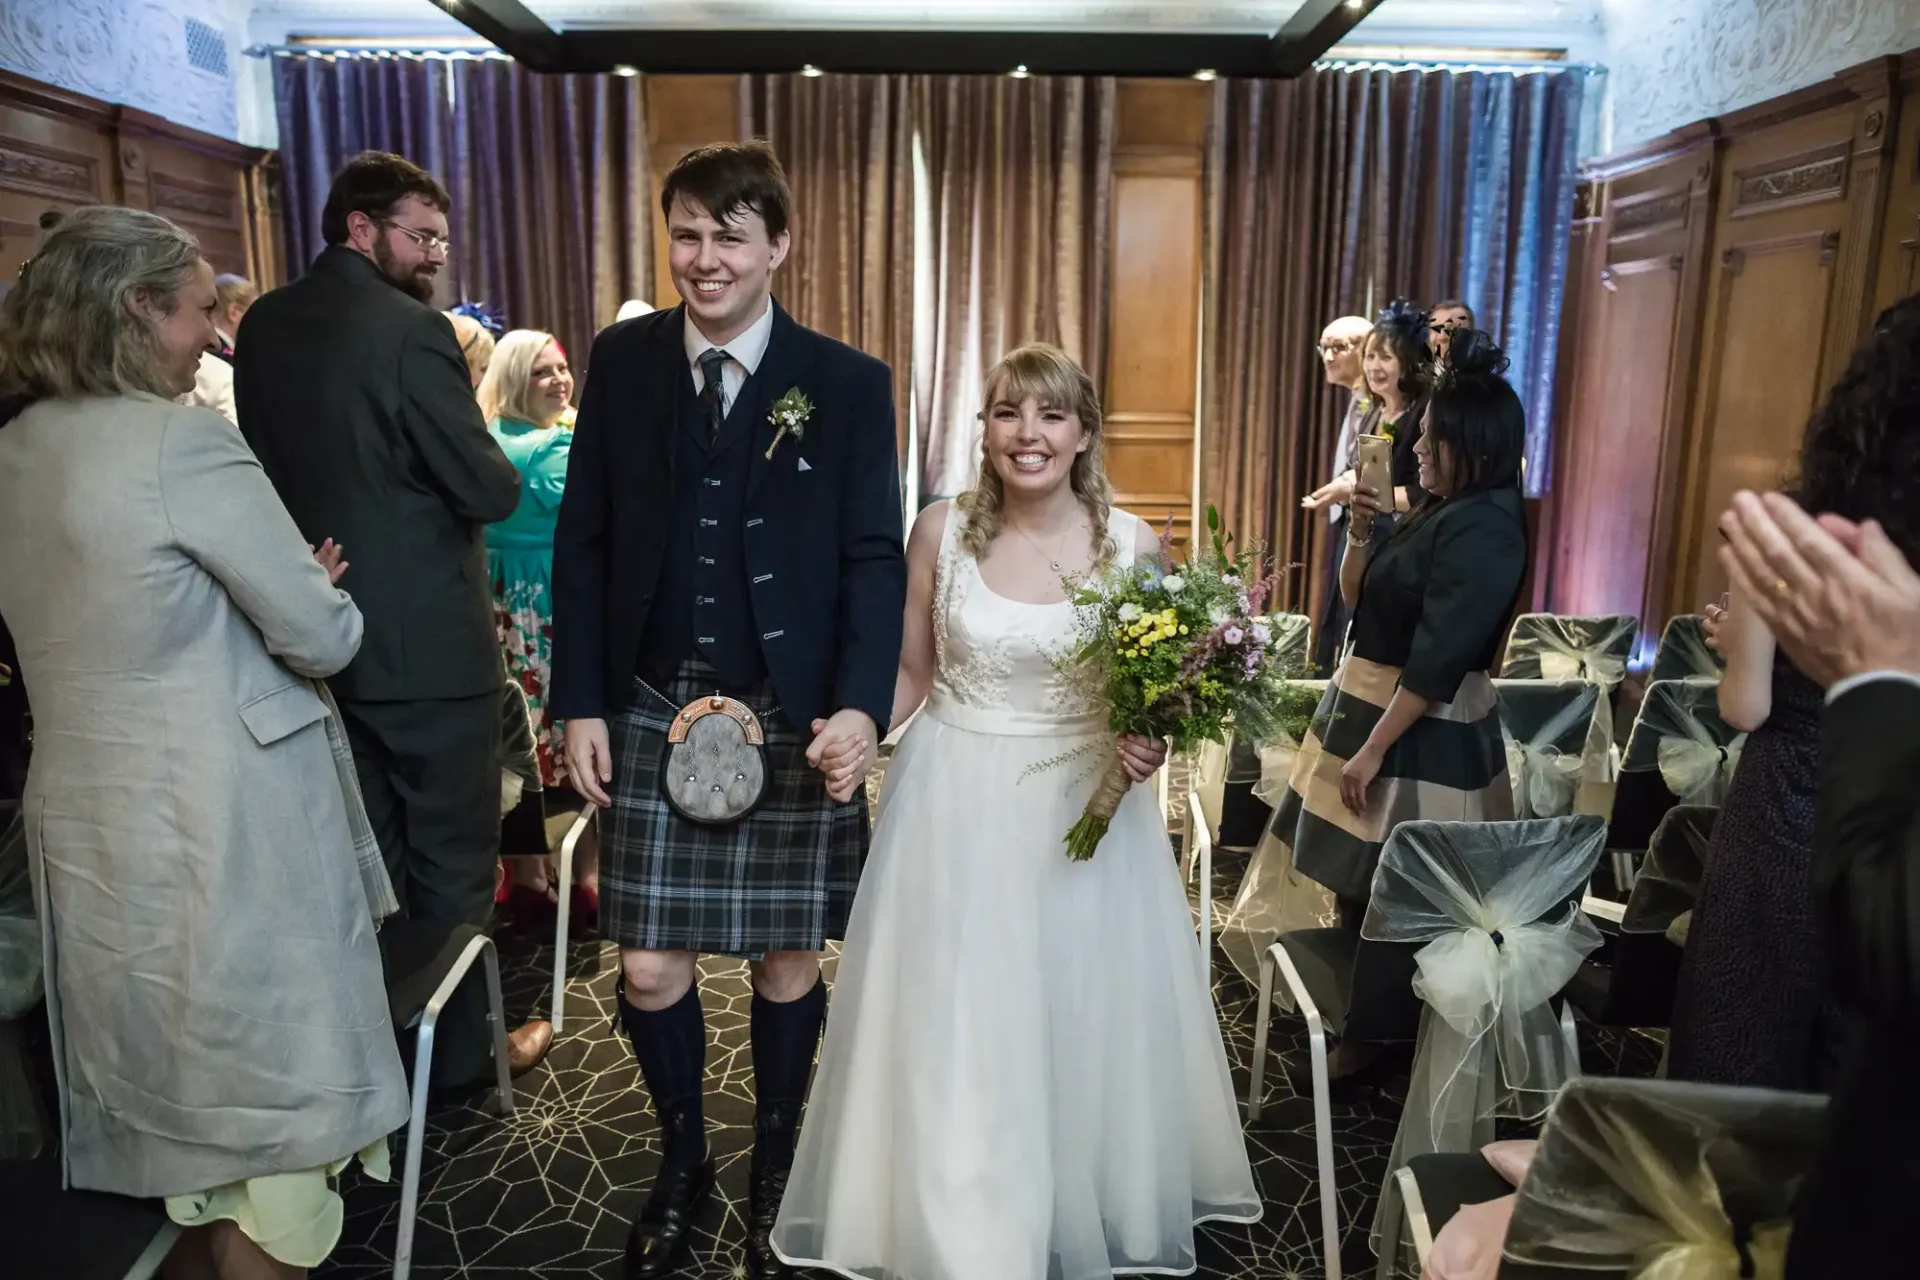 A smiling bride and groom in traditional scottish attire walk down the aisle, surrounded by applauding guests in an elegantly decorated hall.